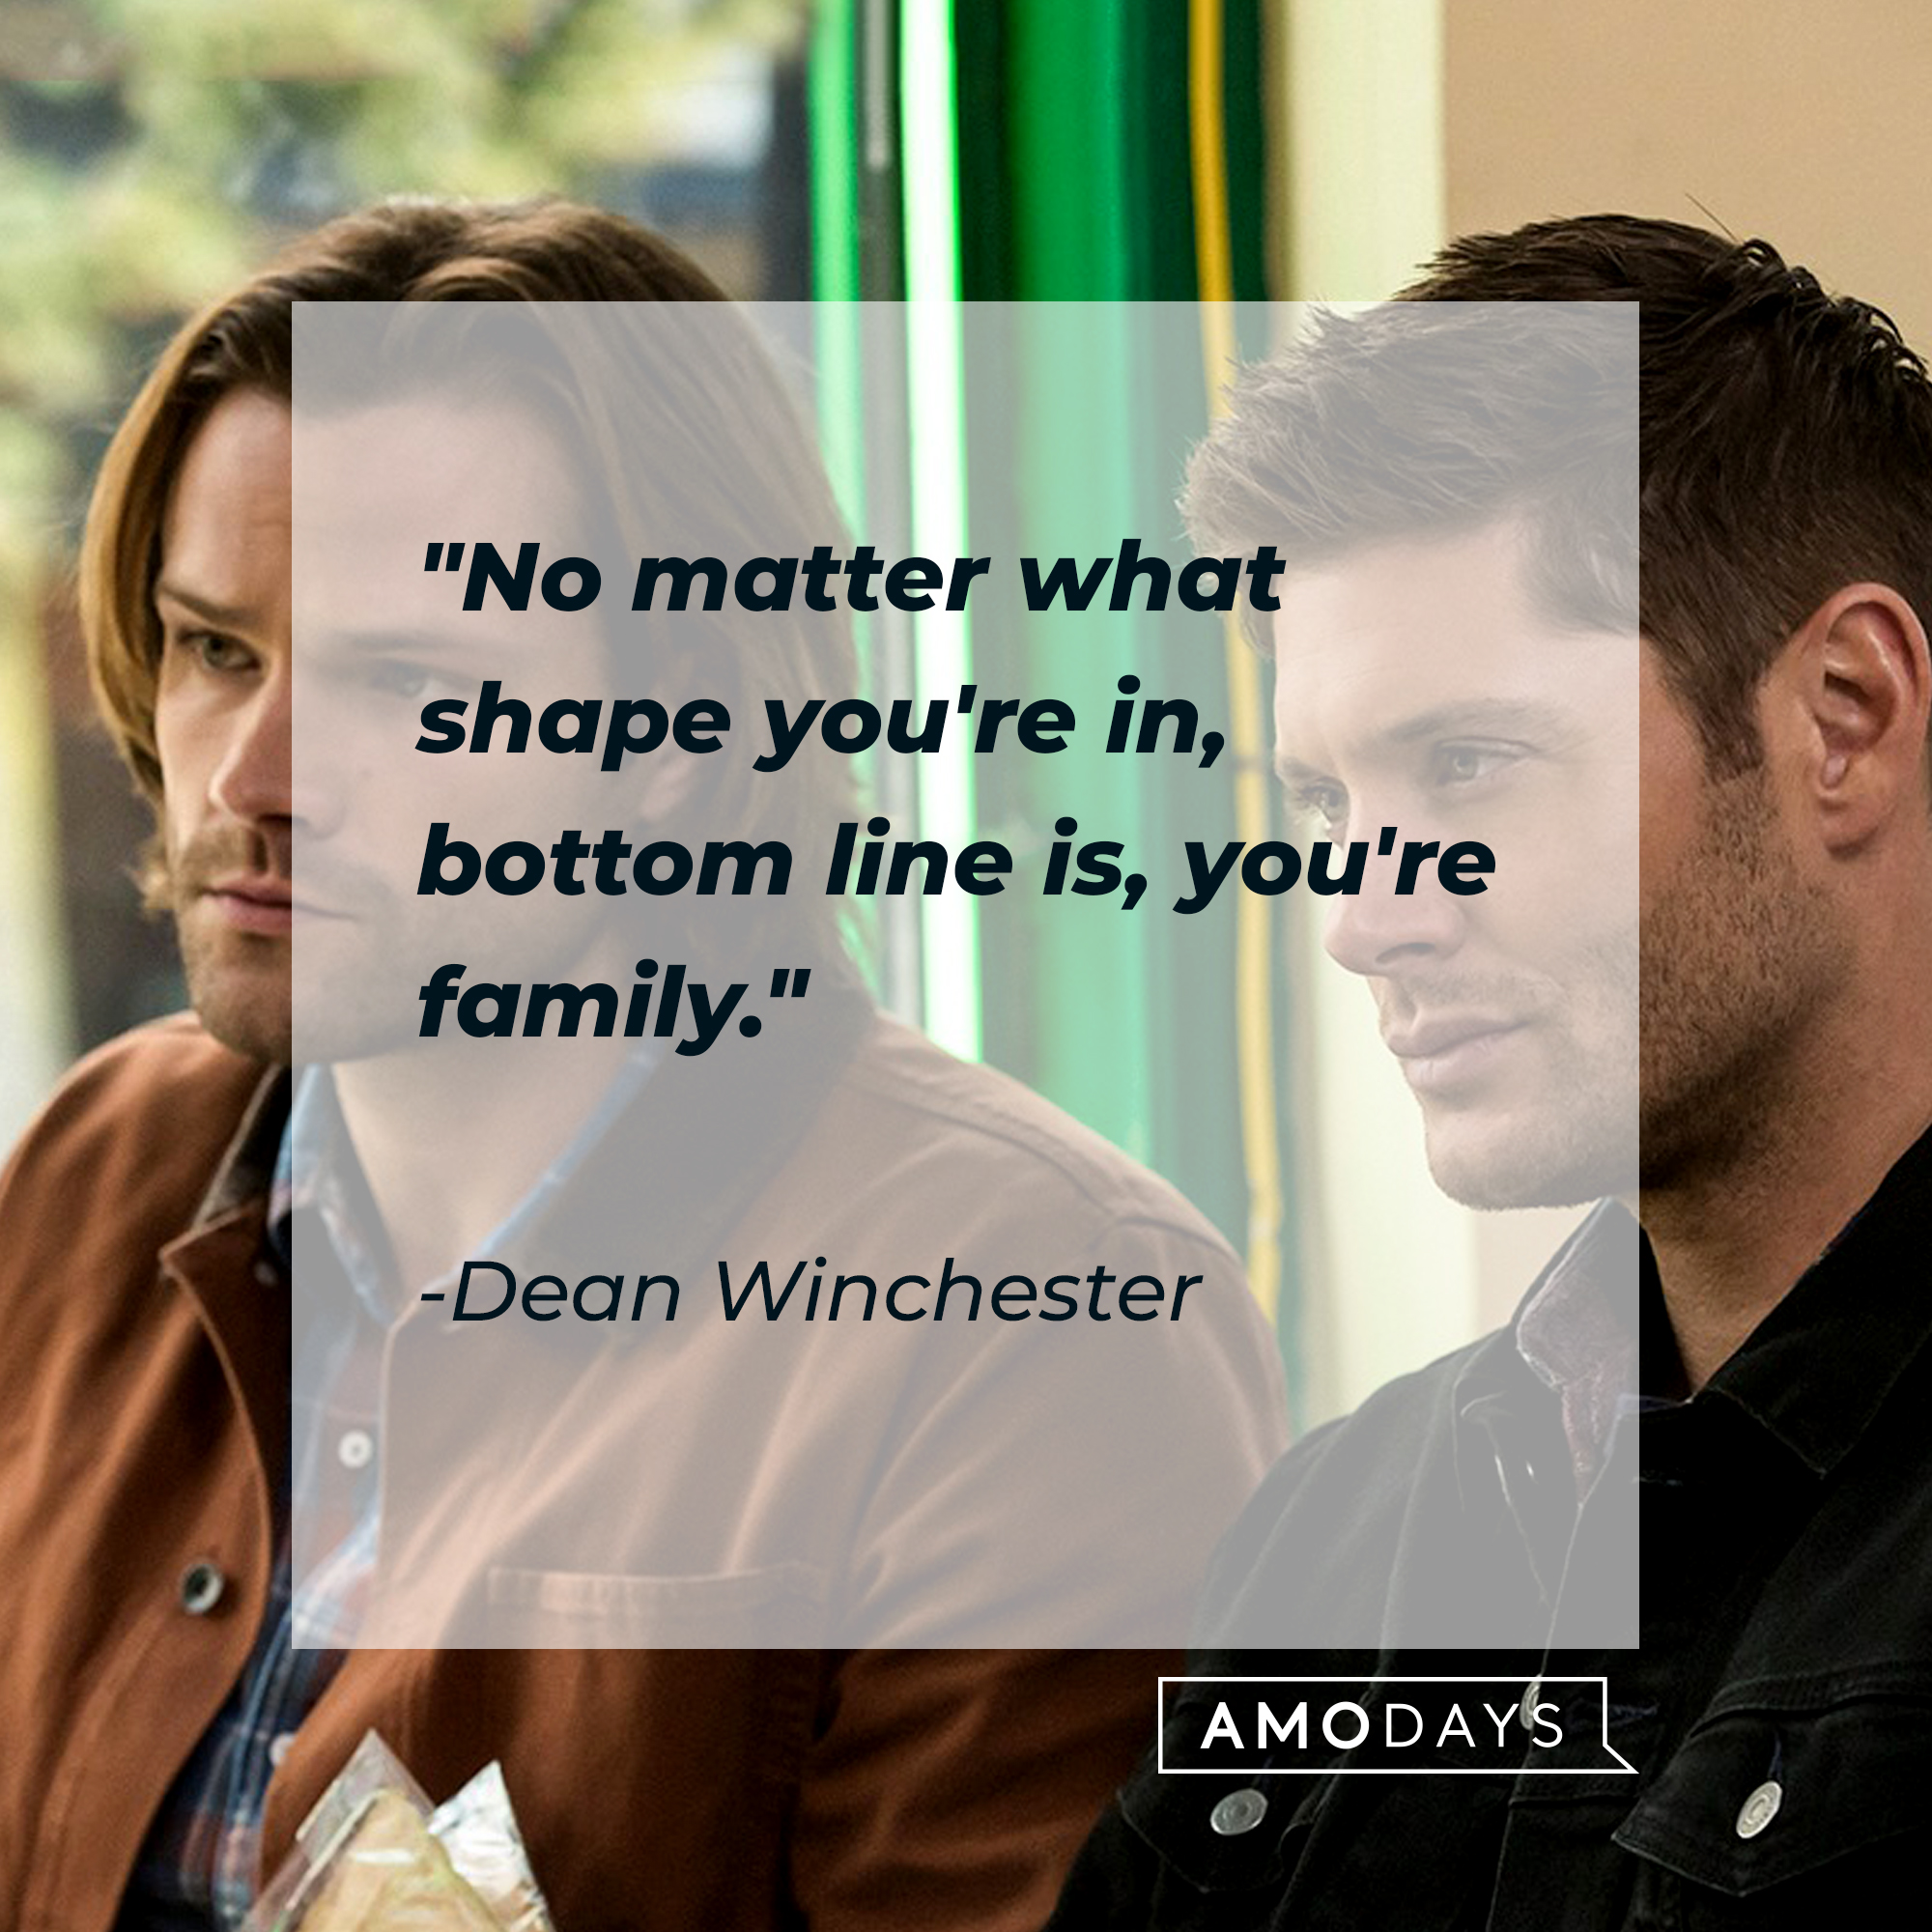 A photo of Sam and Dean Winchester, with Dean's quote, "No matter what shape you're in, bottom line is, you're family." | Source: Facebook/Supernatural